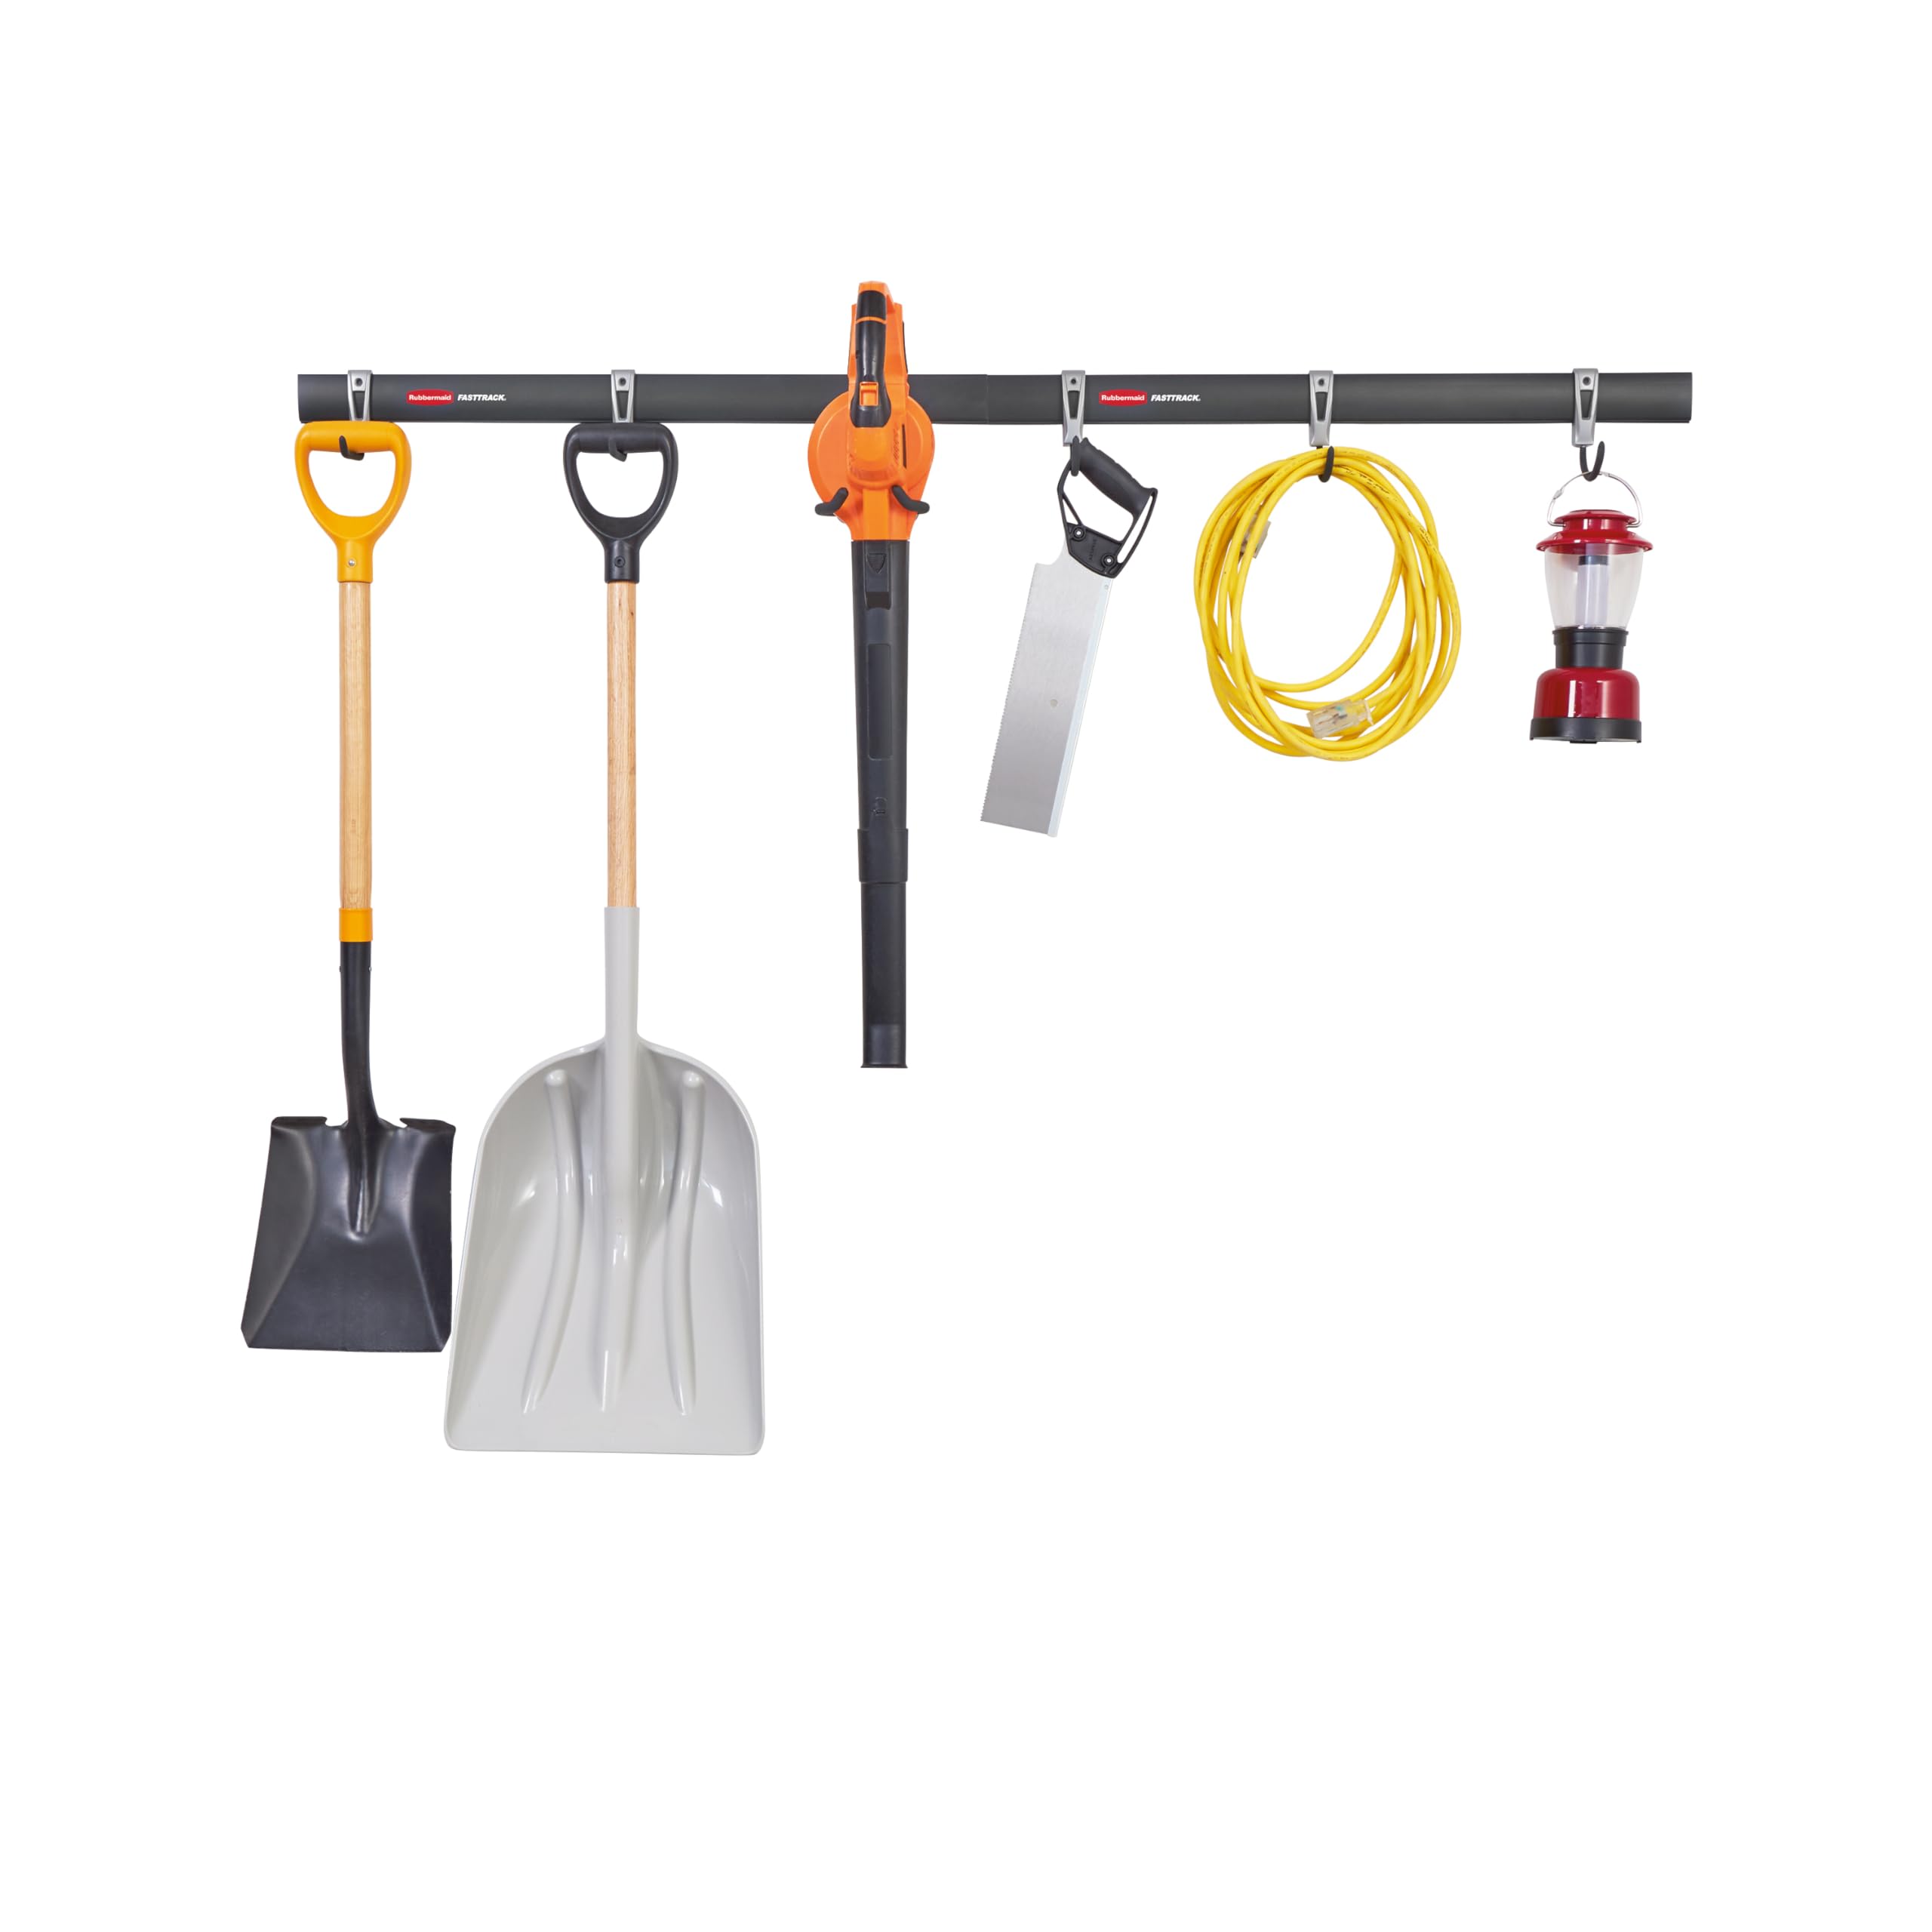 8-Piece Rubbermaid FastTrack Garage Organization Rail & Hook Wall Hanging Kit $23.97 + Free Shipping w/ Prime or on $35+